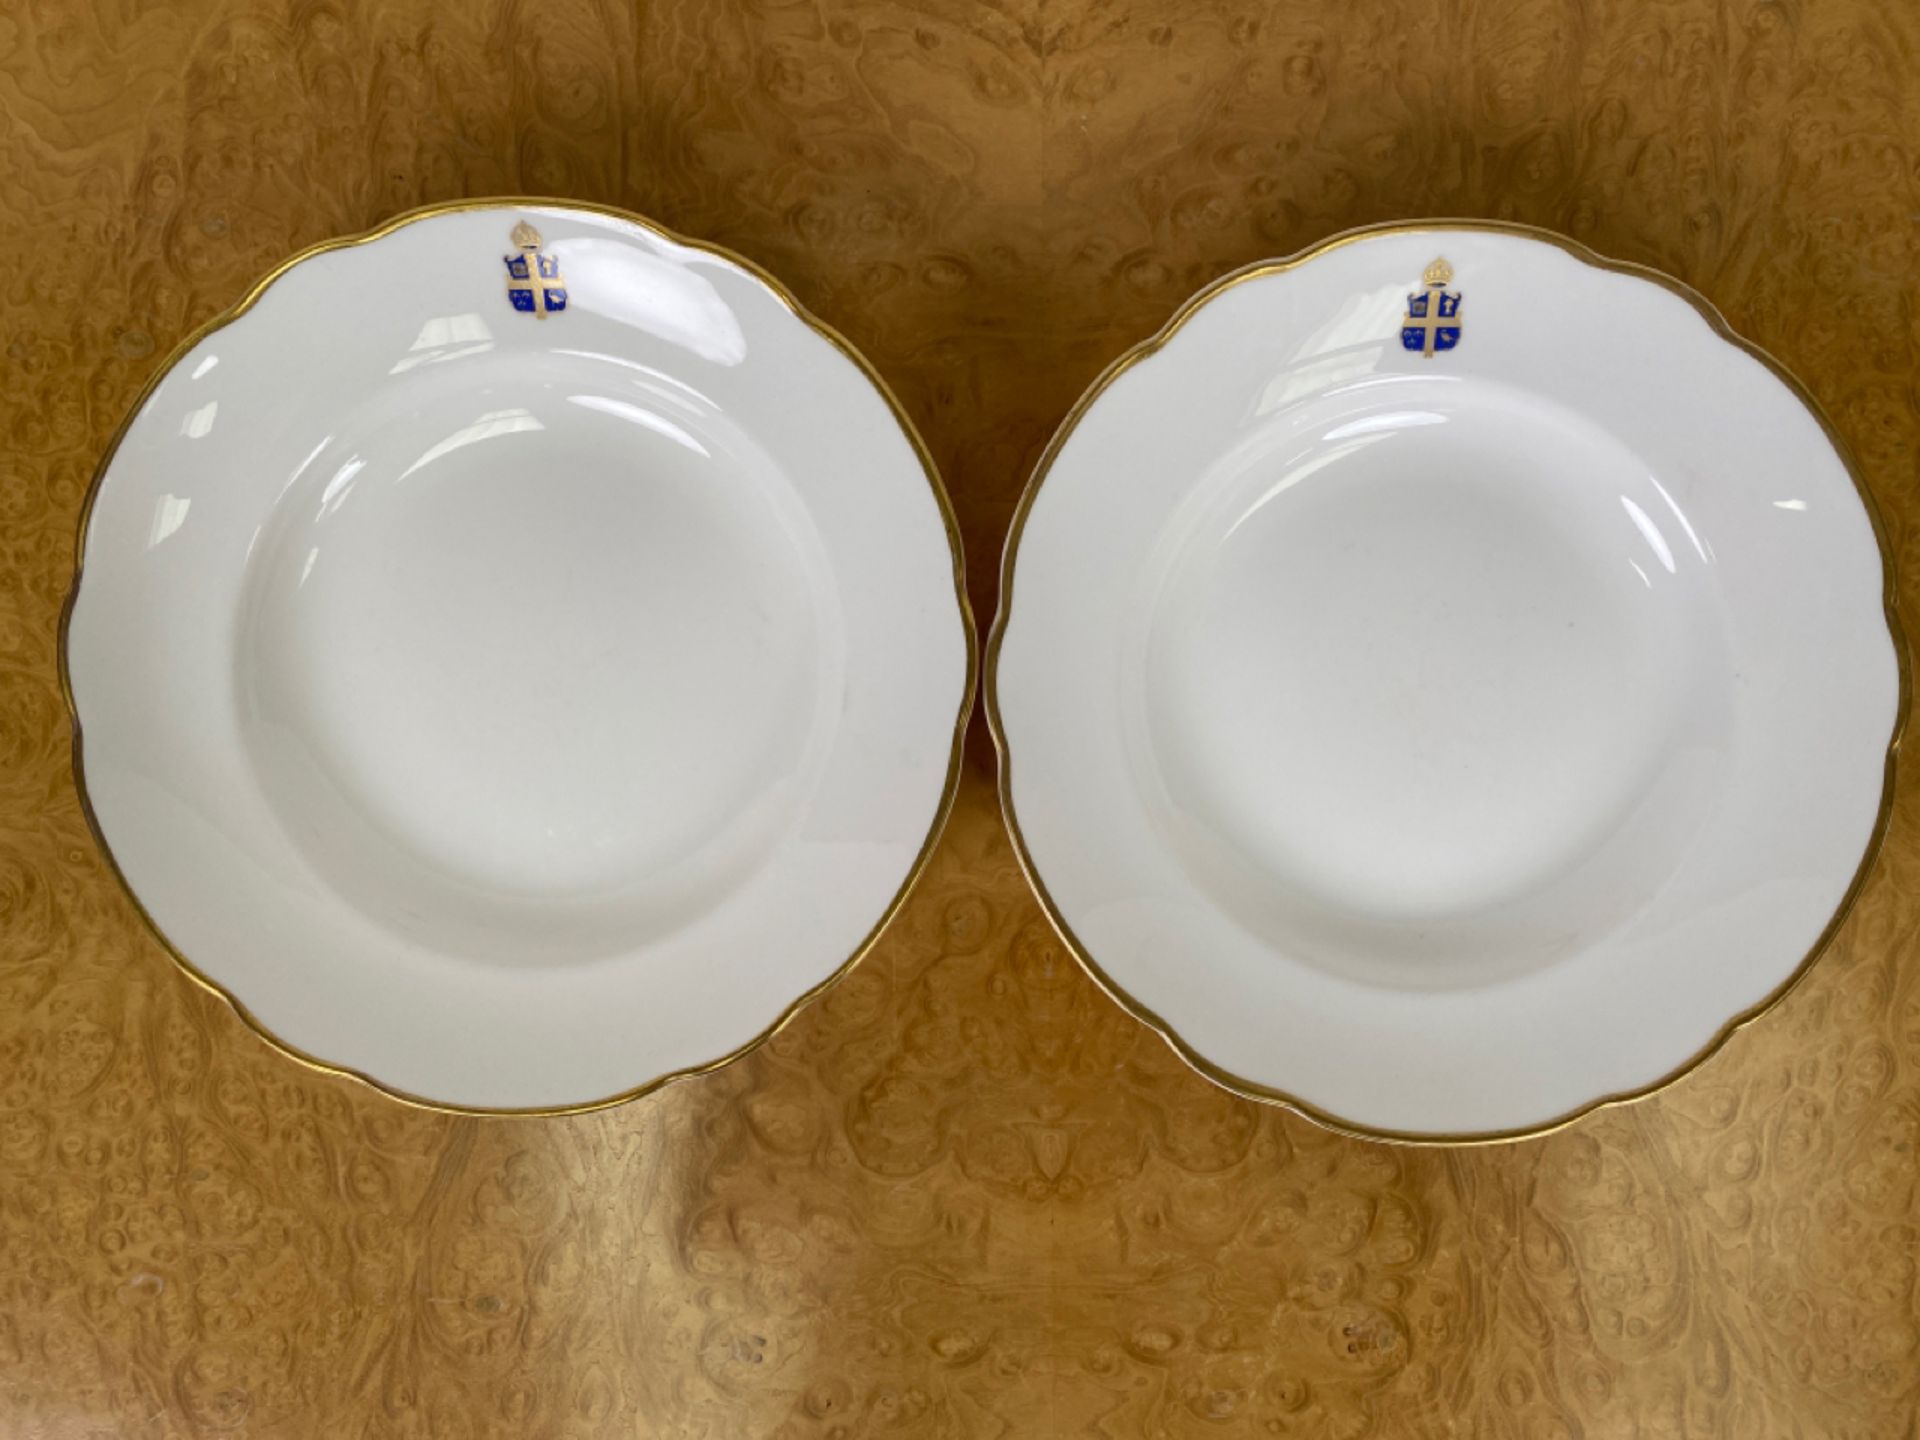 Set of Crested Crockery for Claridge's by Chommette 1884 - Image 39 of 44